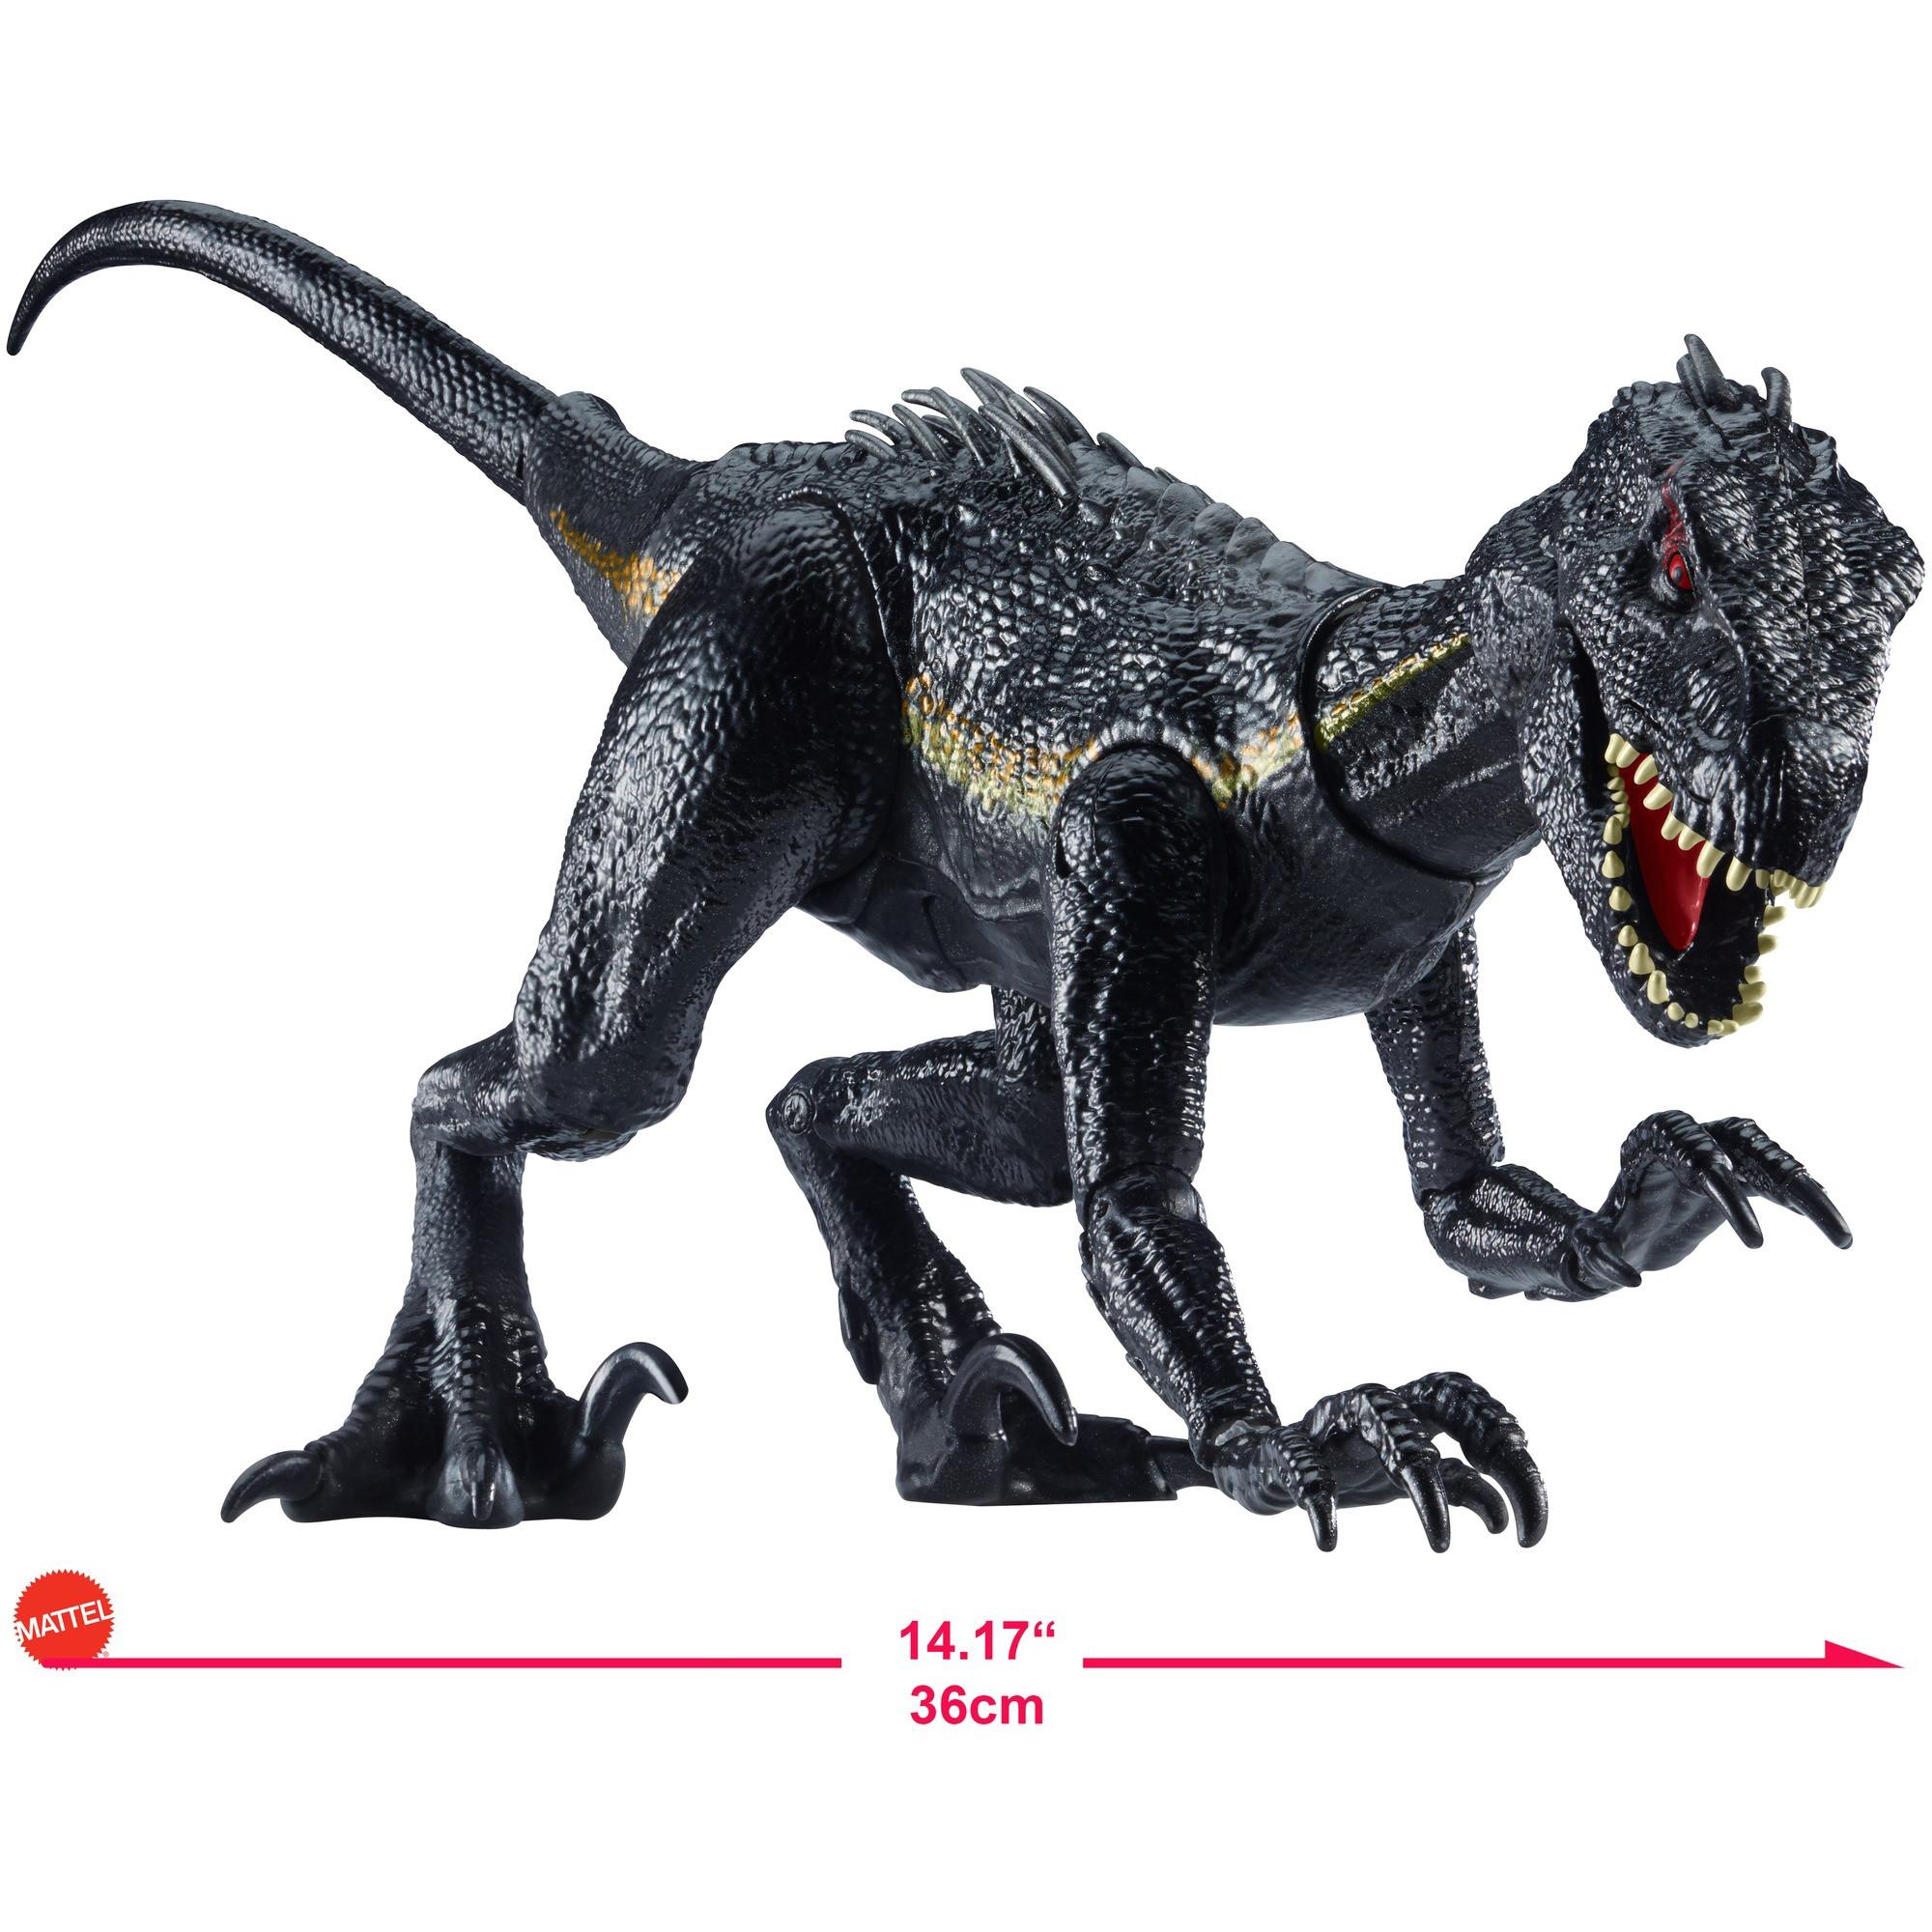 Jurassic World: Fallen Kingdom Indoraptor Dinosaur Action Figure with Movable Joints, Toy Gift ​ - image 2 of 6